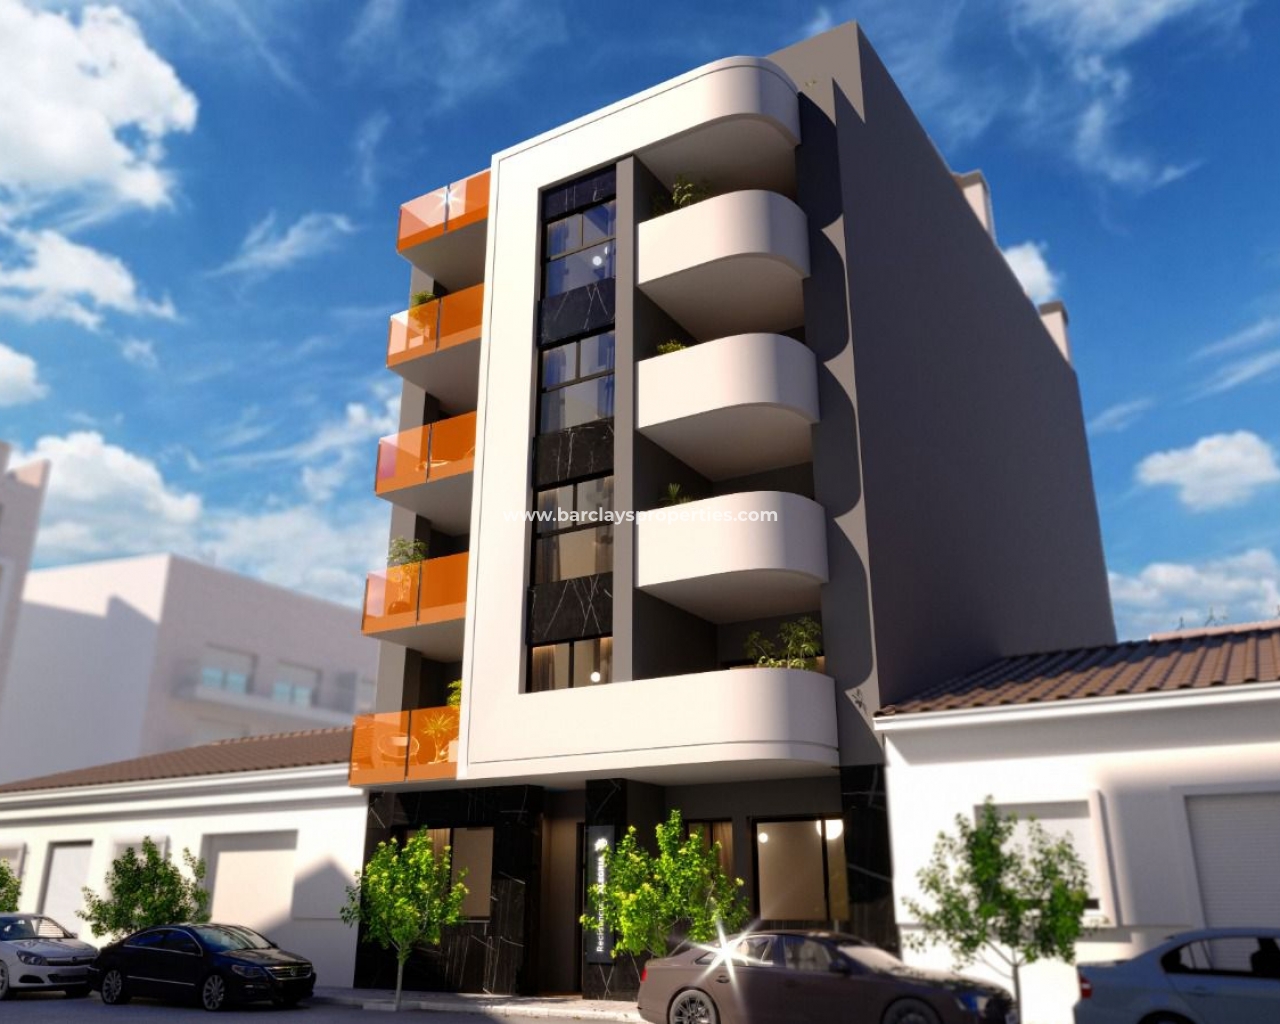 New-Build - New Build - Torrevieja - NB5314